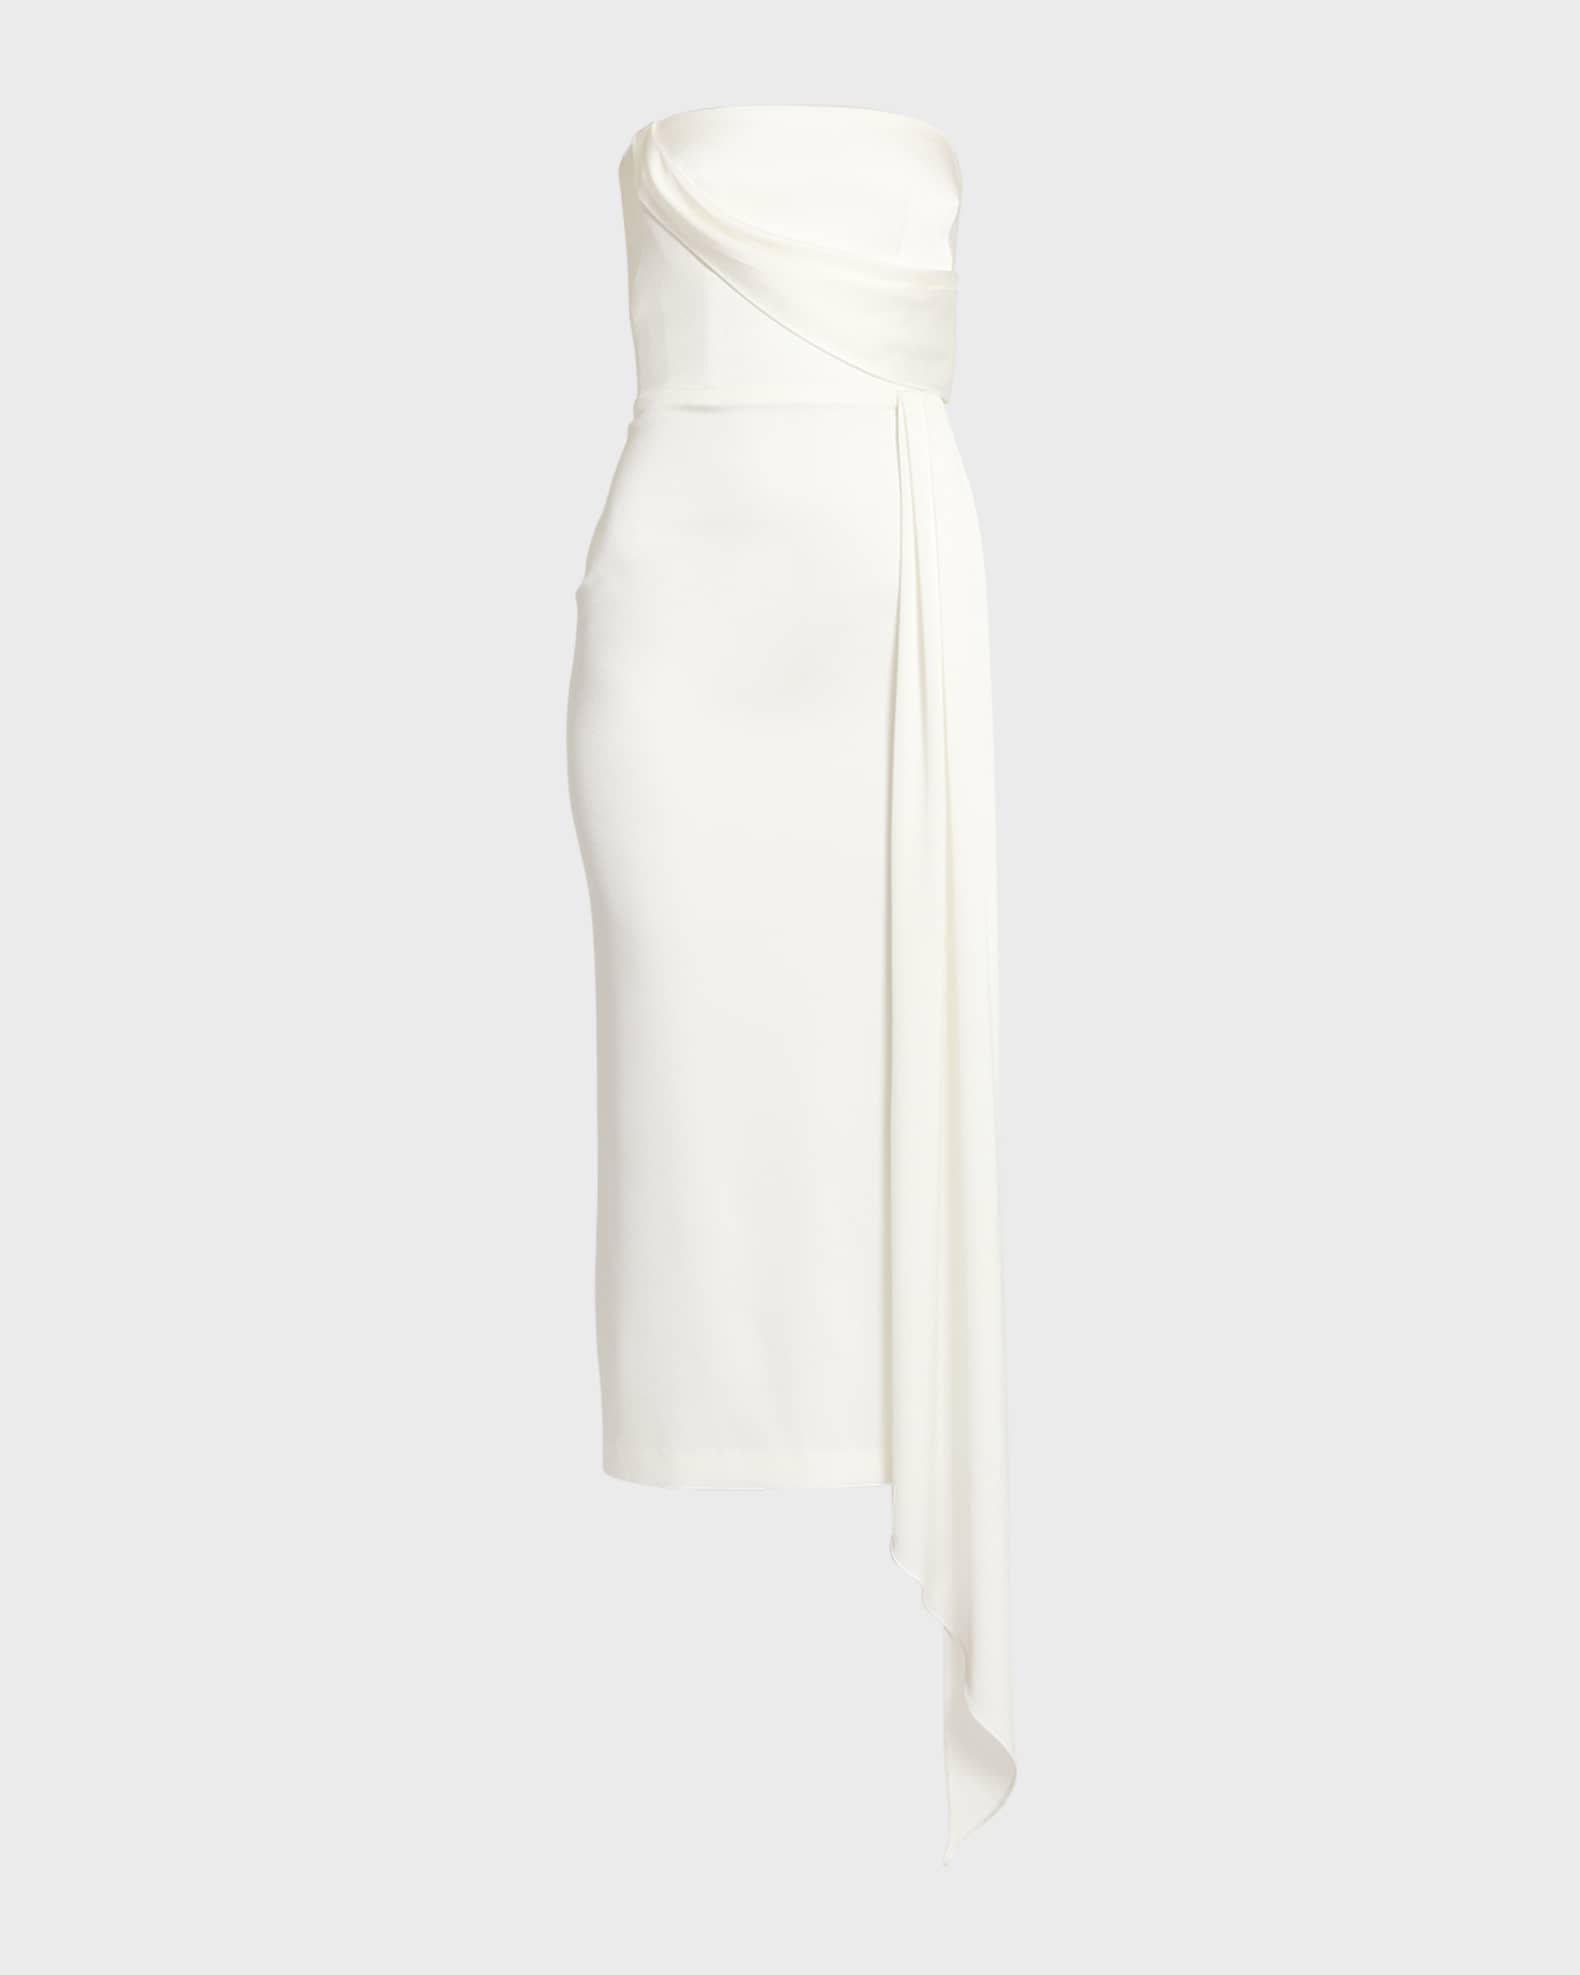 Alex Perry Satin Crepe Strapless Dress With Drape Detail | Neiman Marcus